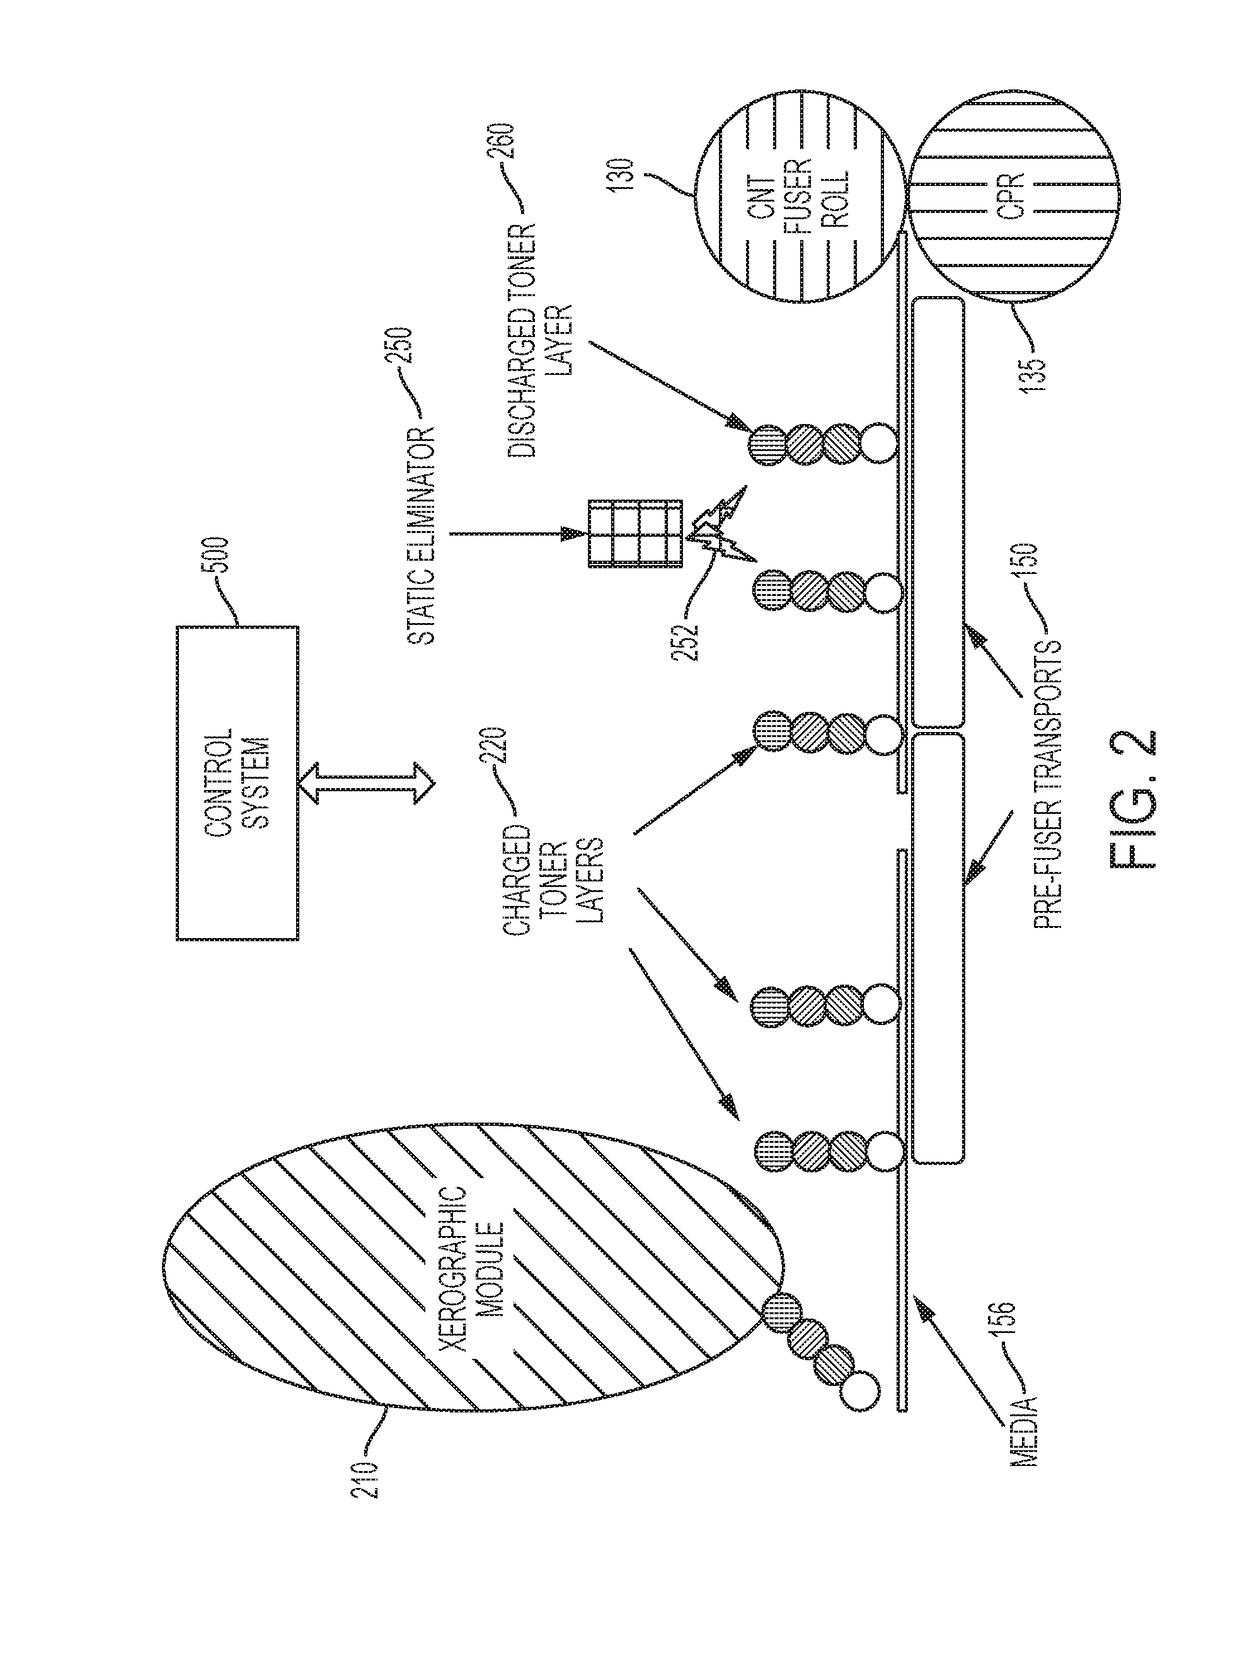 Use of active static elimination on un-fused prints in an electrostatic printing apparatus